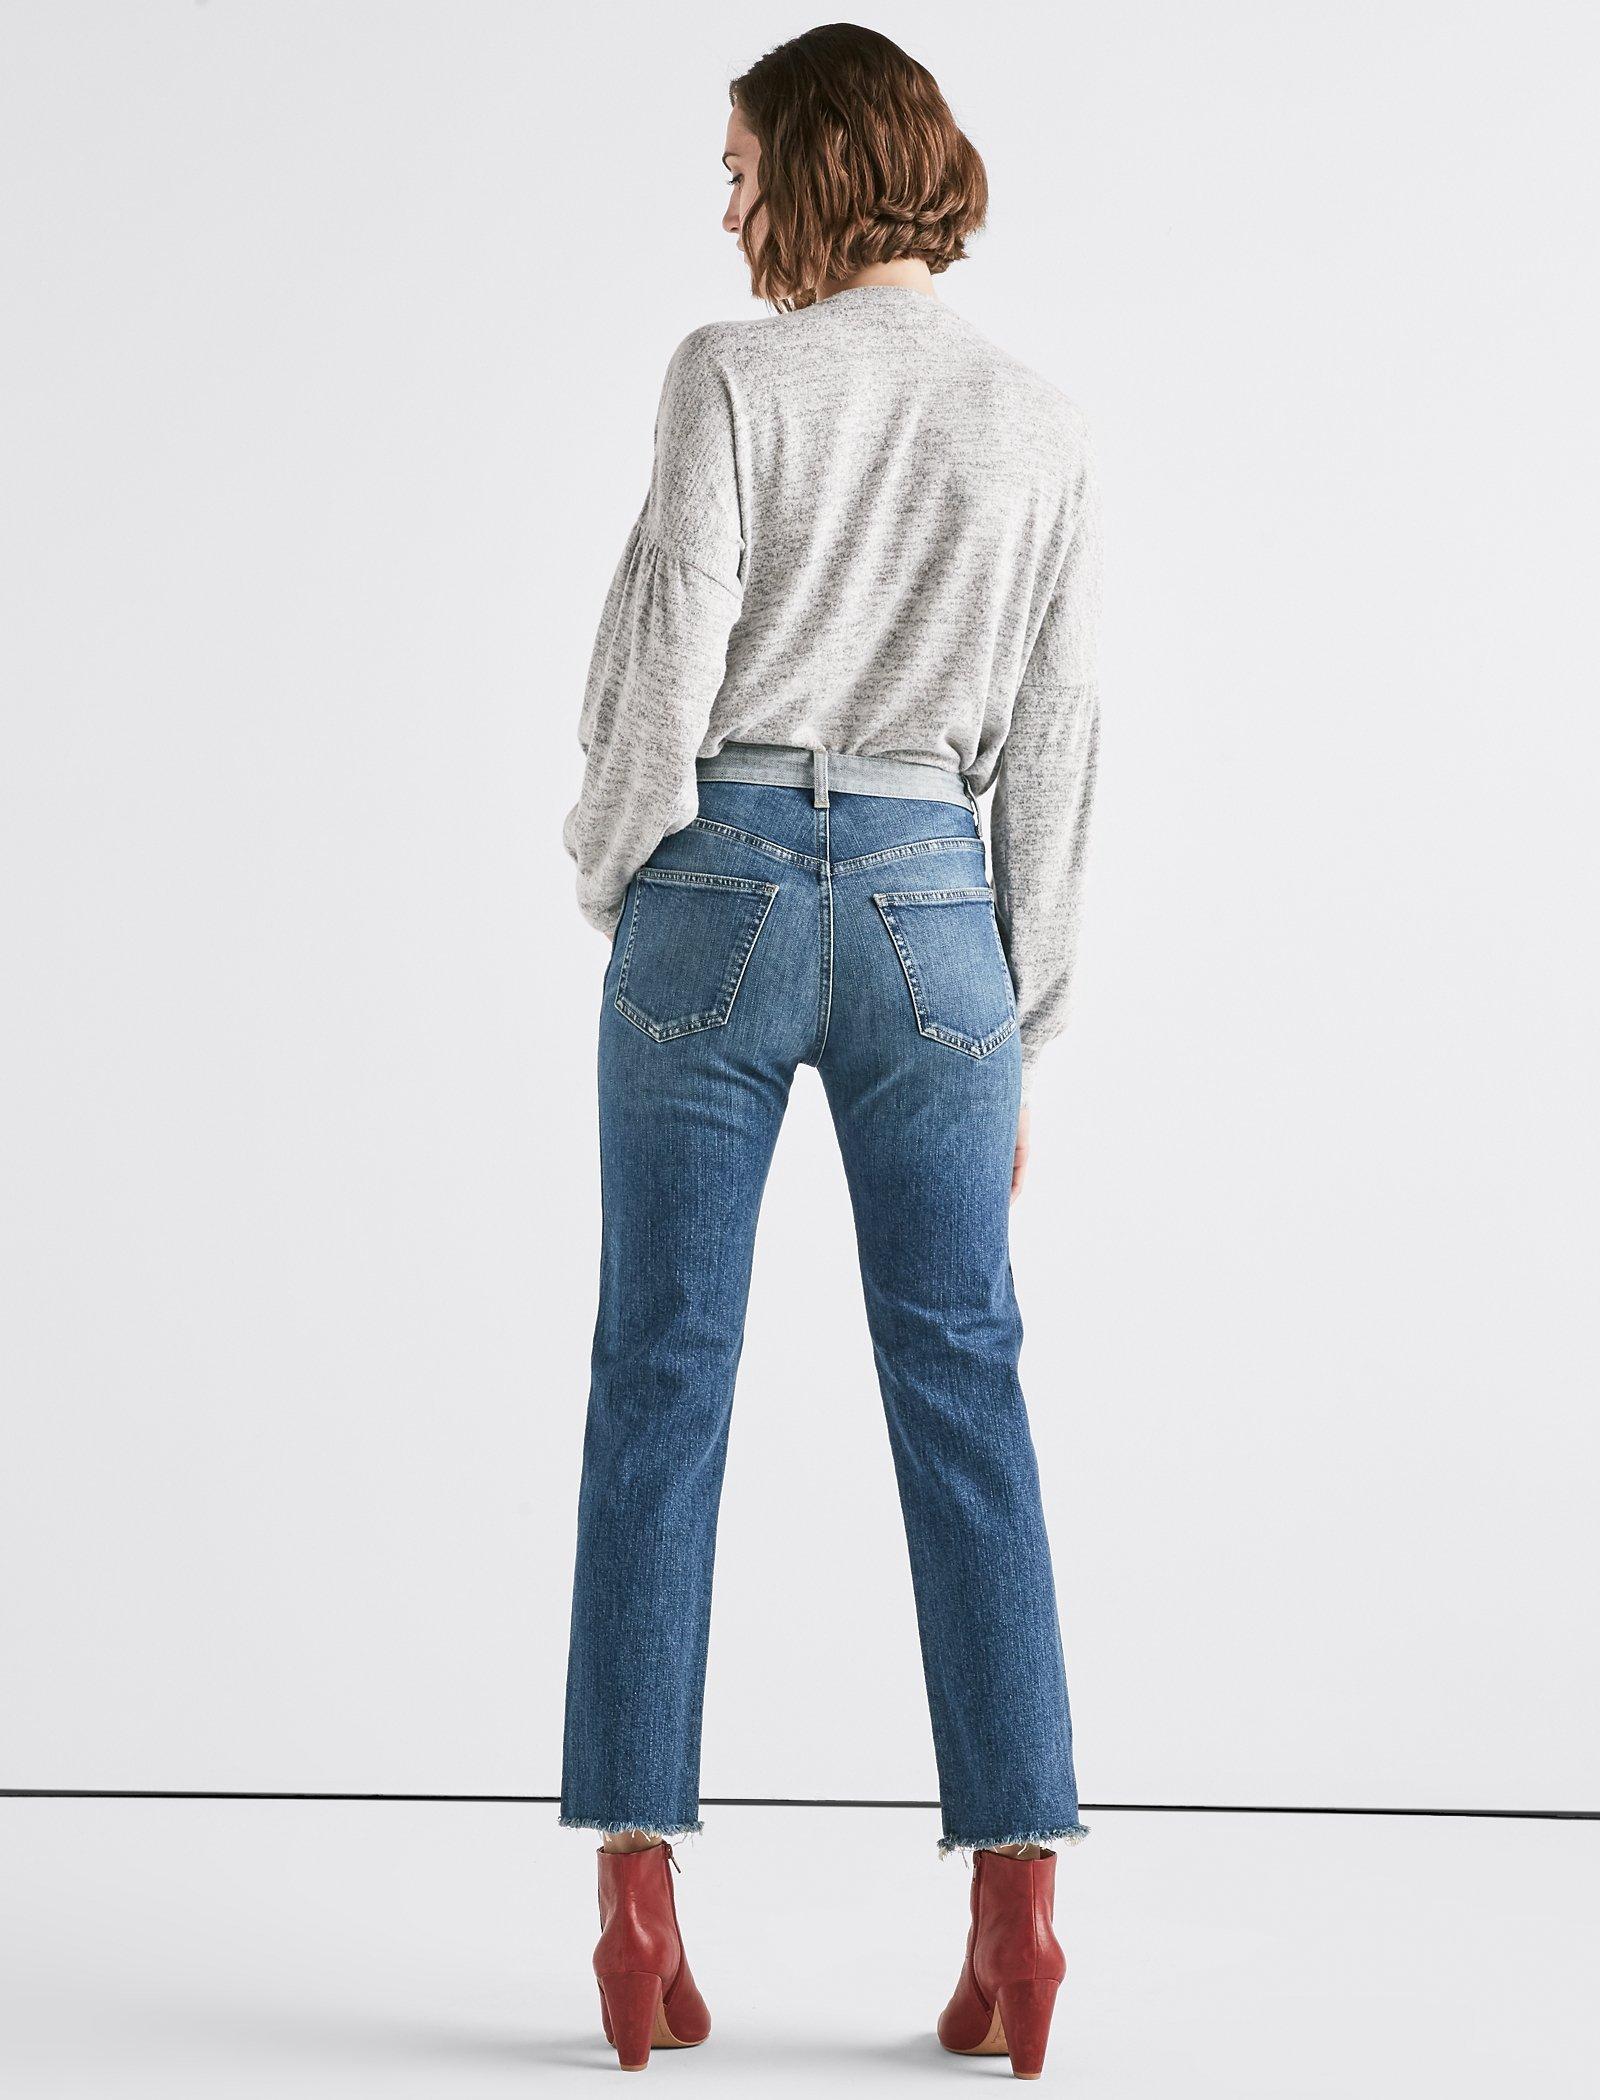 LUCKY REMADE LUCKY PINS CUSTOMIZED TAPERED JEAN | Lucky Brand